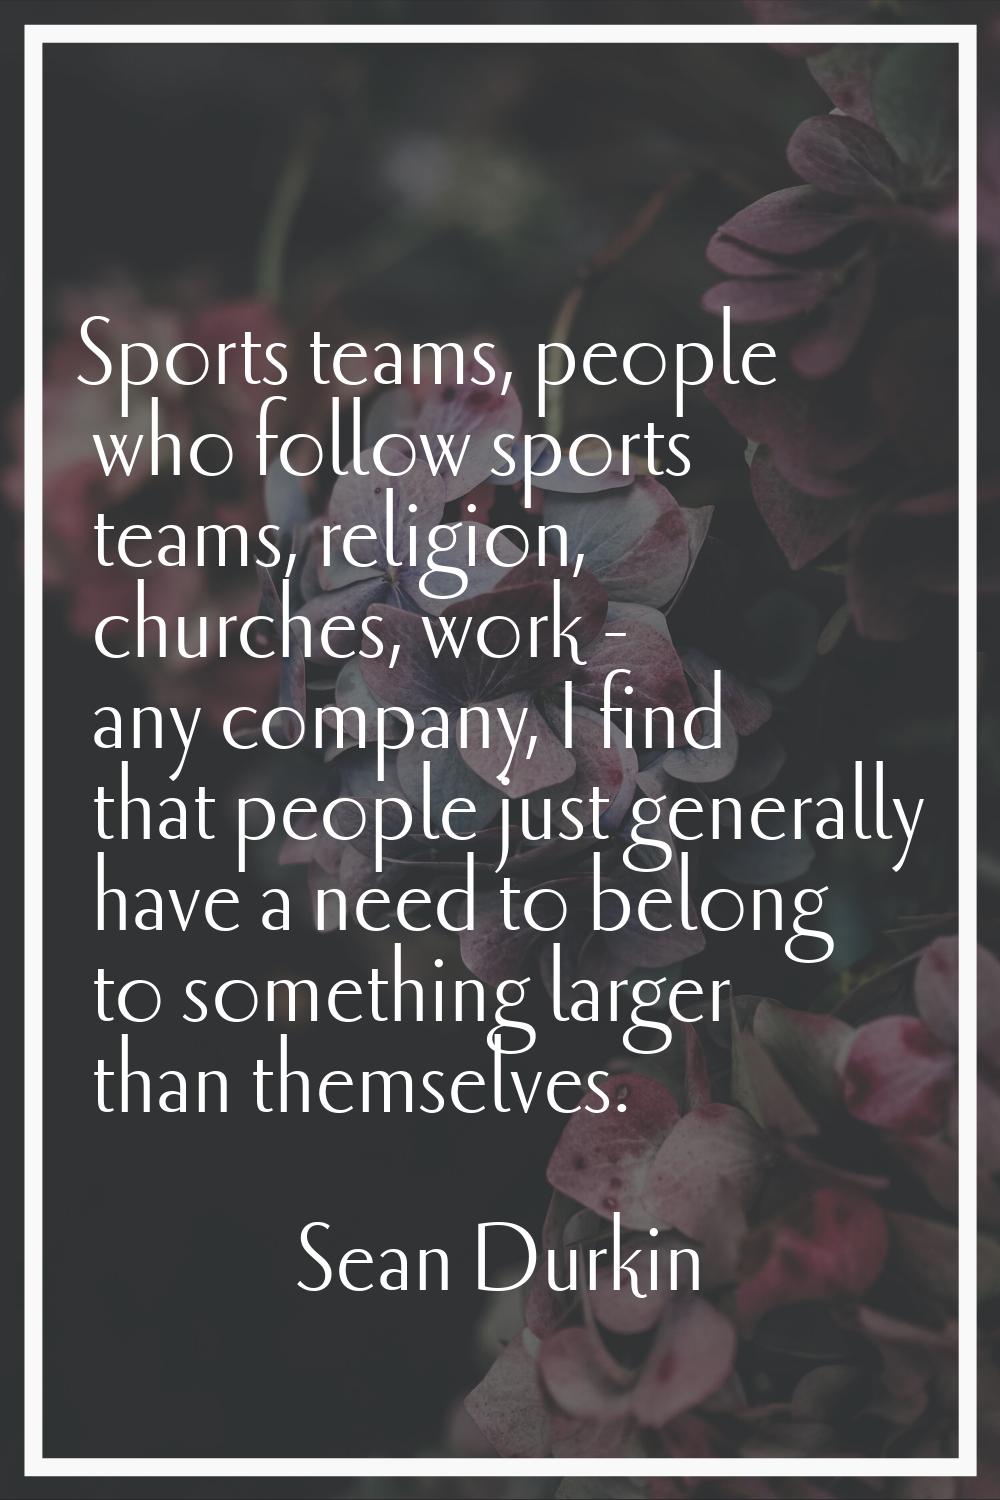 Sports teams, people who follow sports teams, religion, churches, work - any company, I find that p